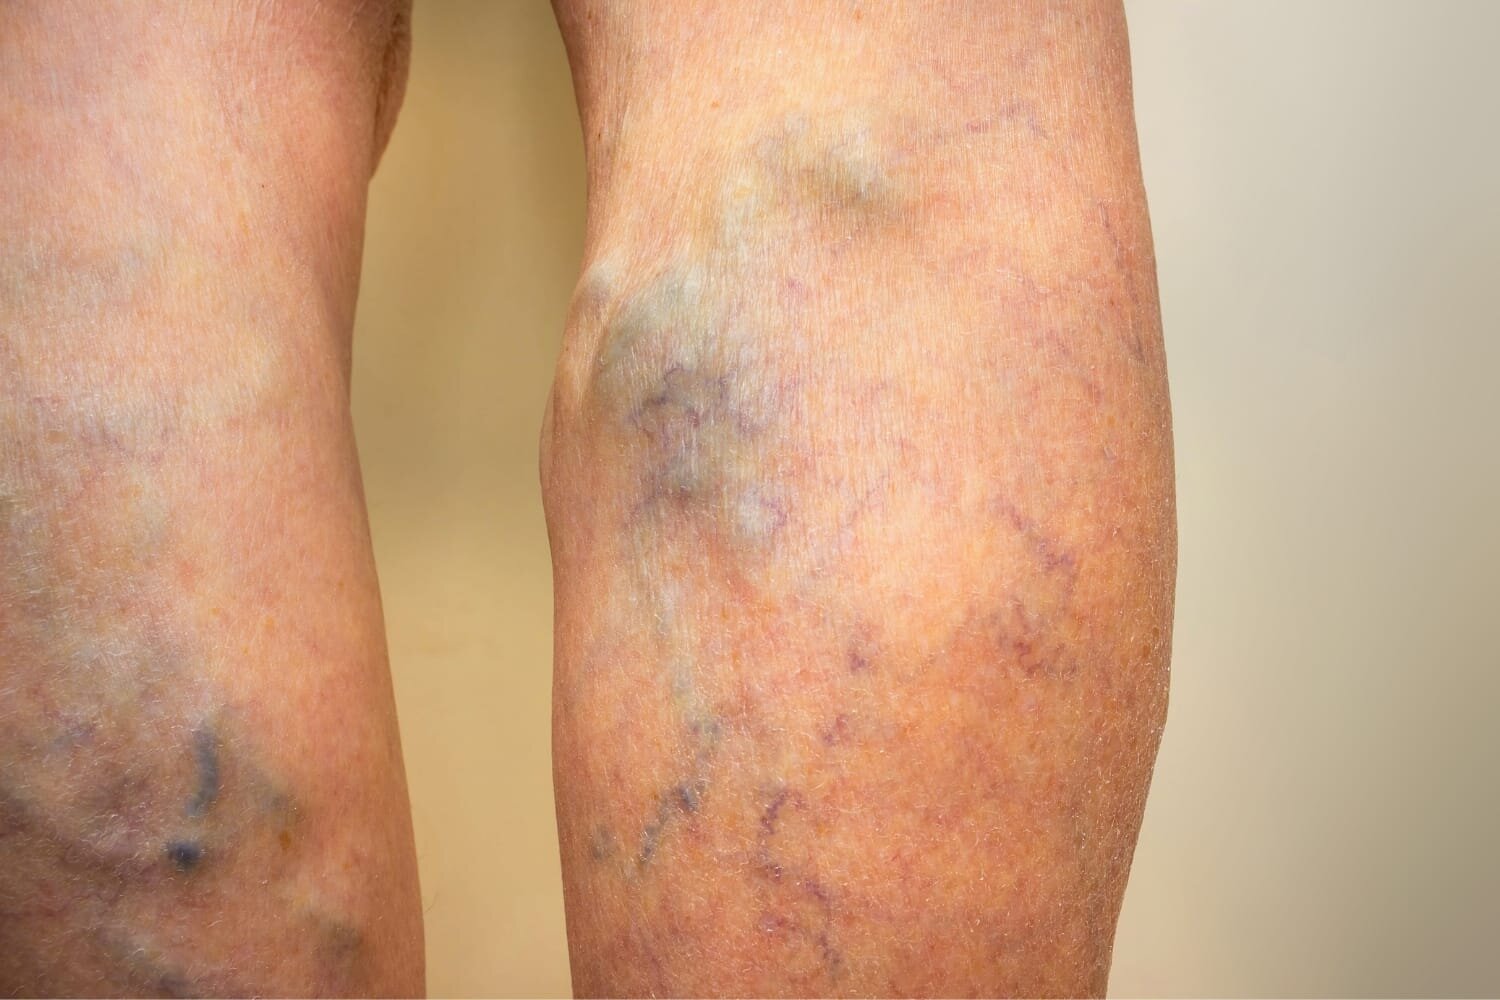 Varicose Vein Treatment: Which Approach Is Best for You?